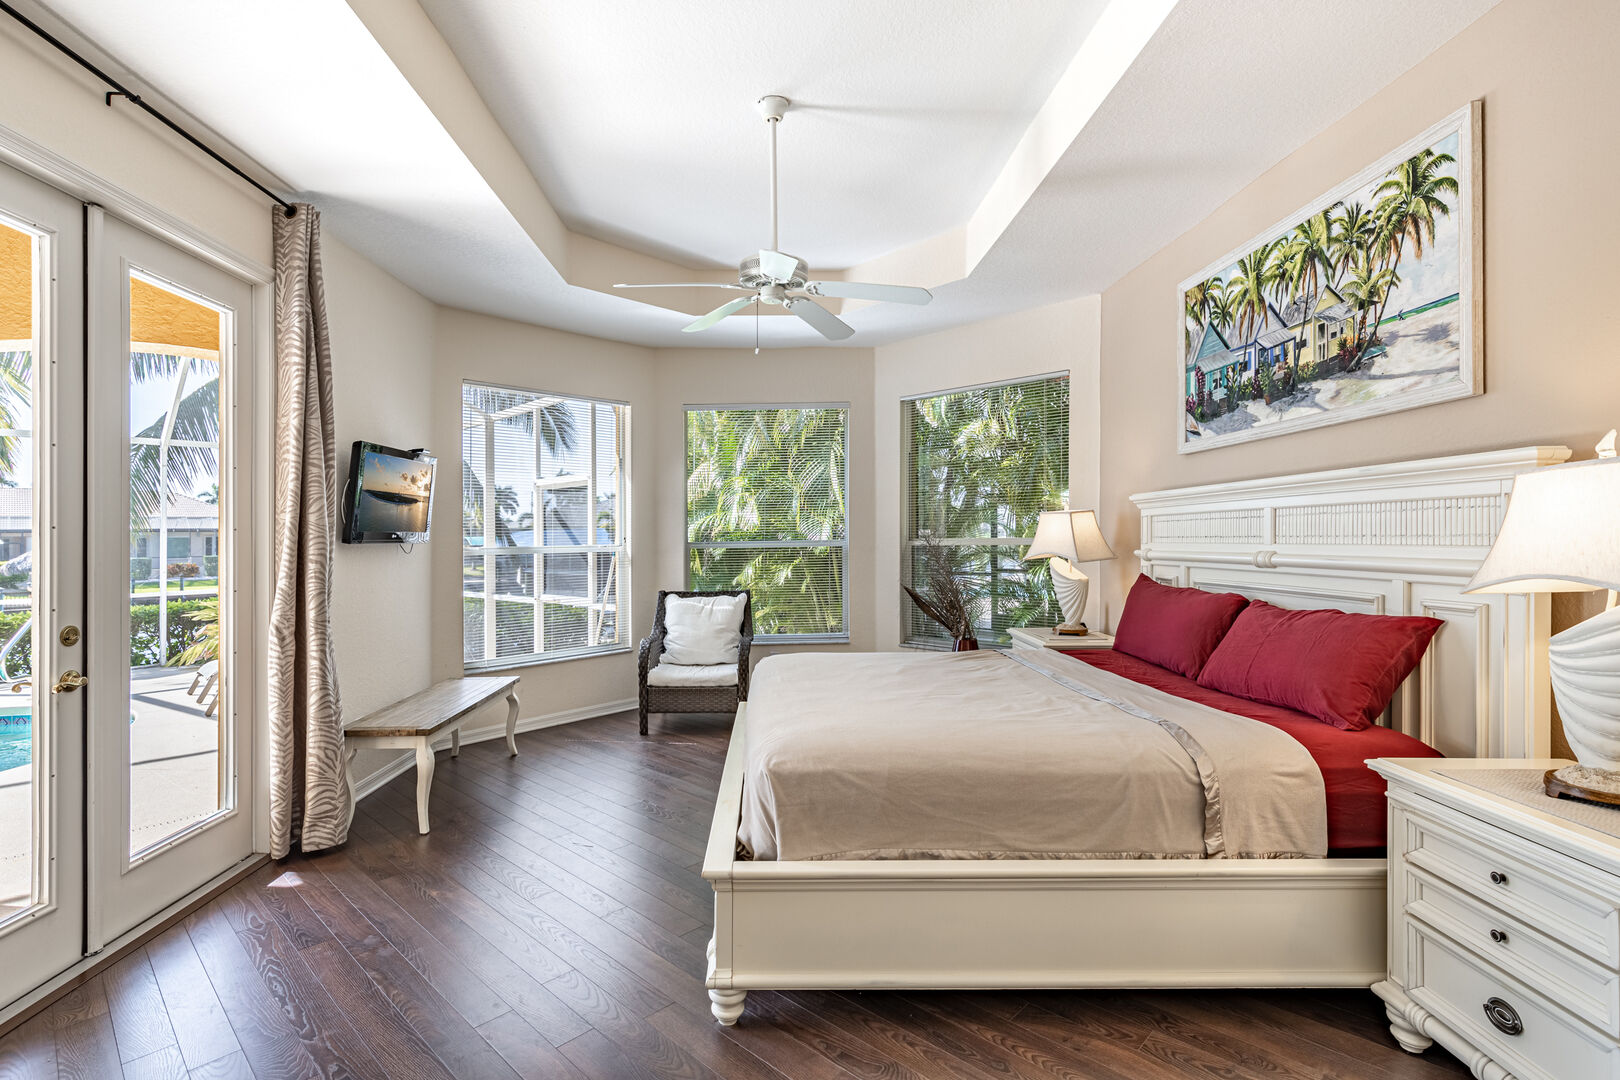 Master Bedroom with lanai access